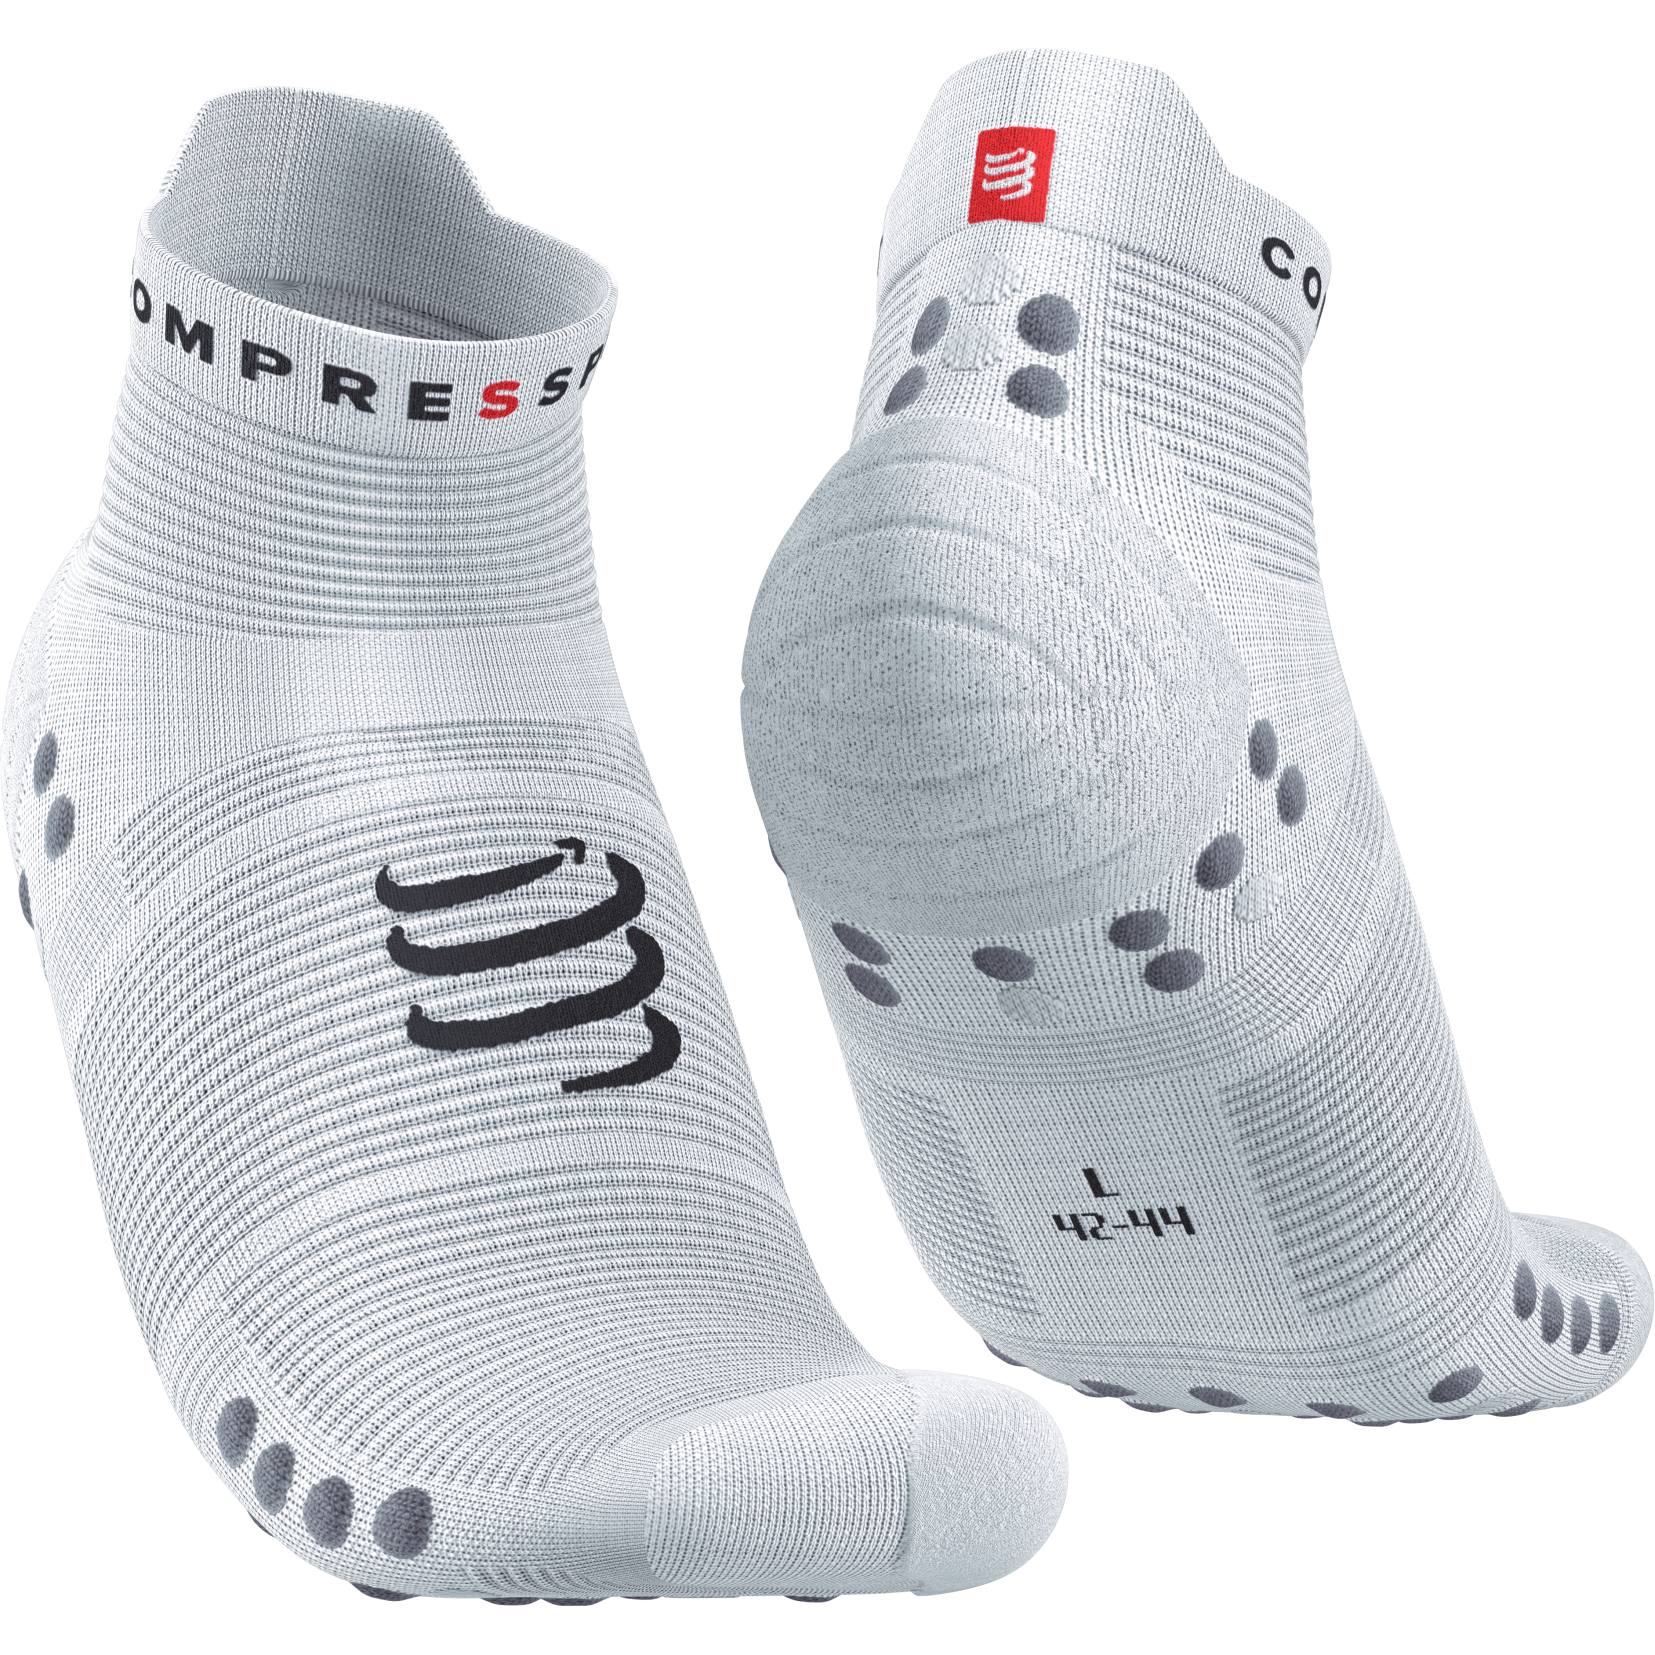 Picture of Compressport Pro Racing Compression Socks v4.0 Run Low - white/alloy